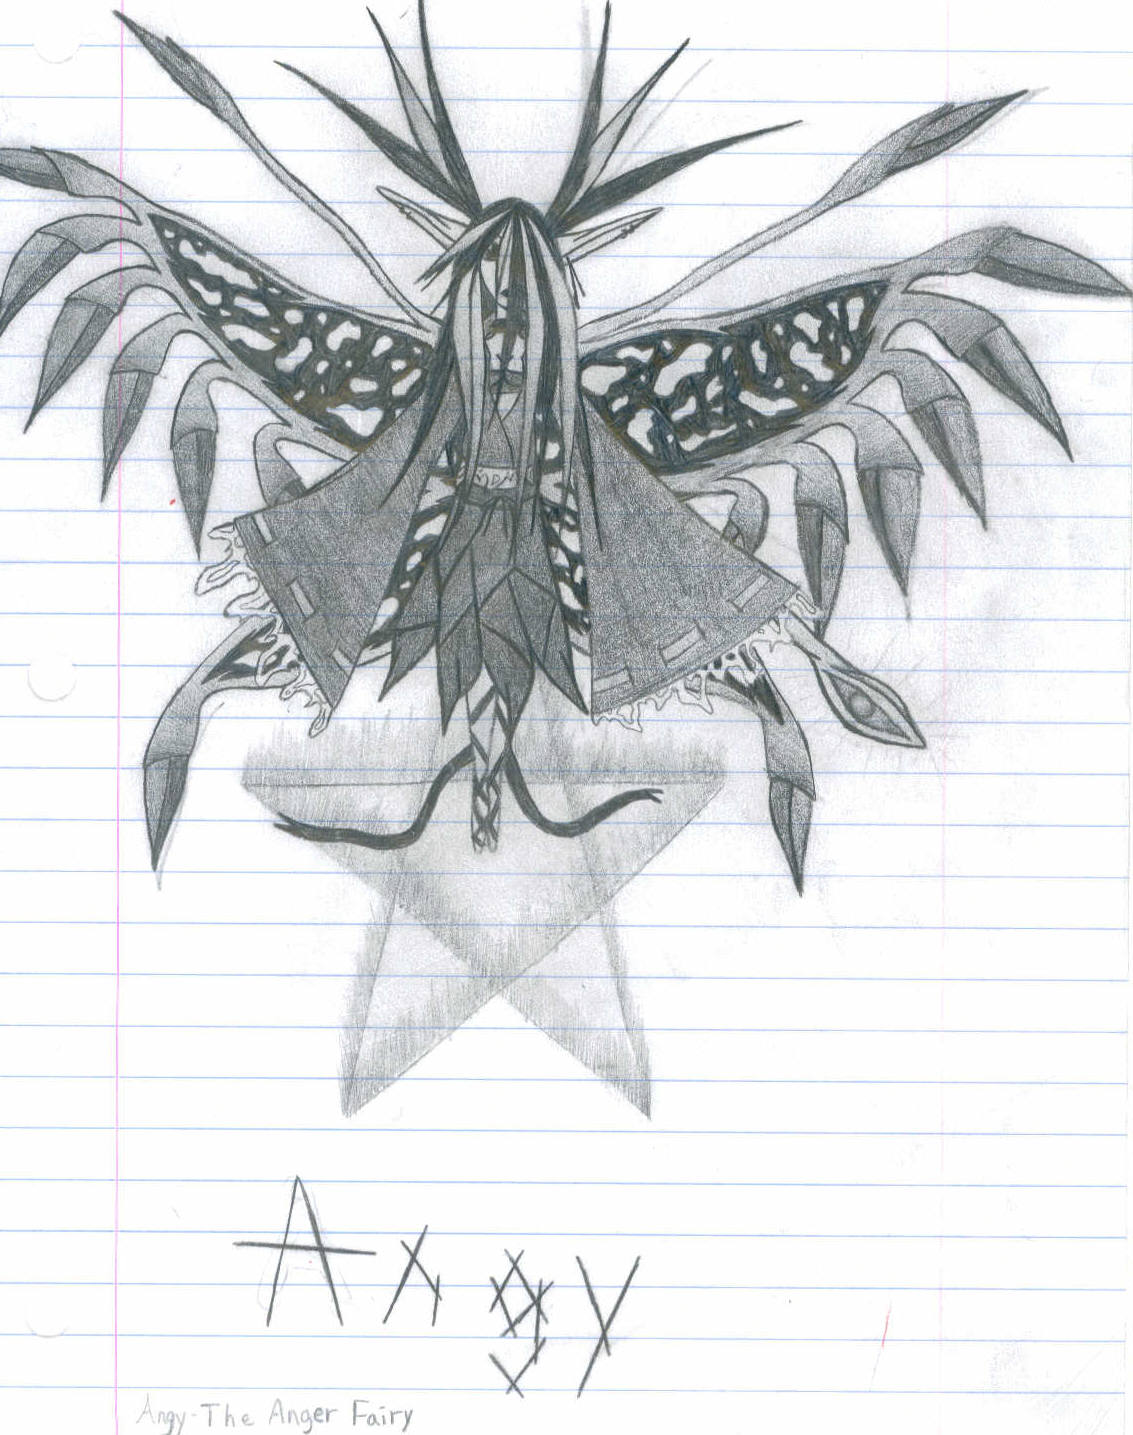 Anger Fairy by kyo0death0kiss